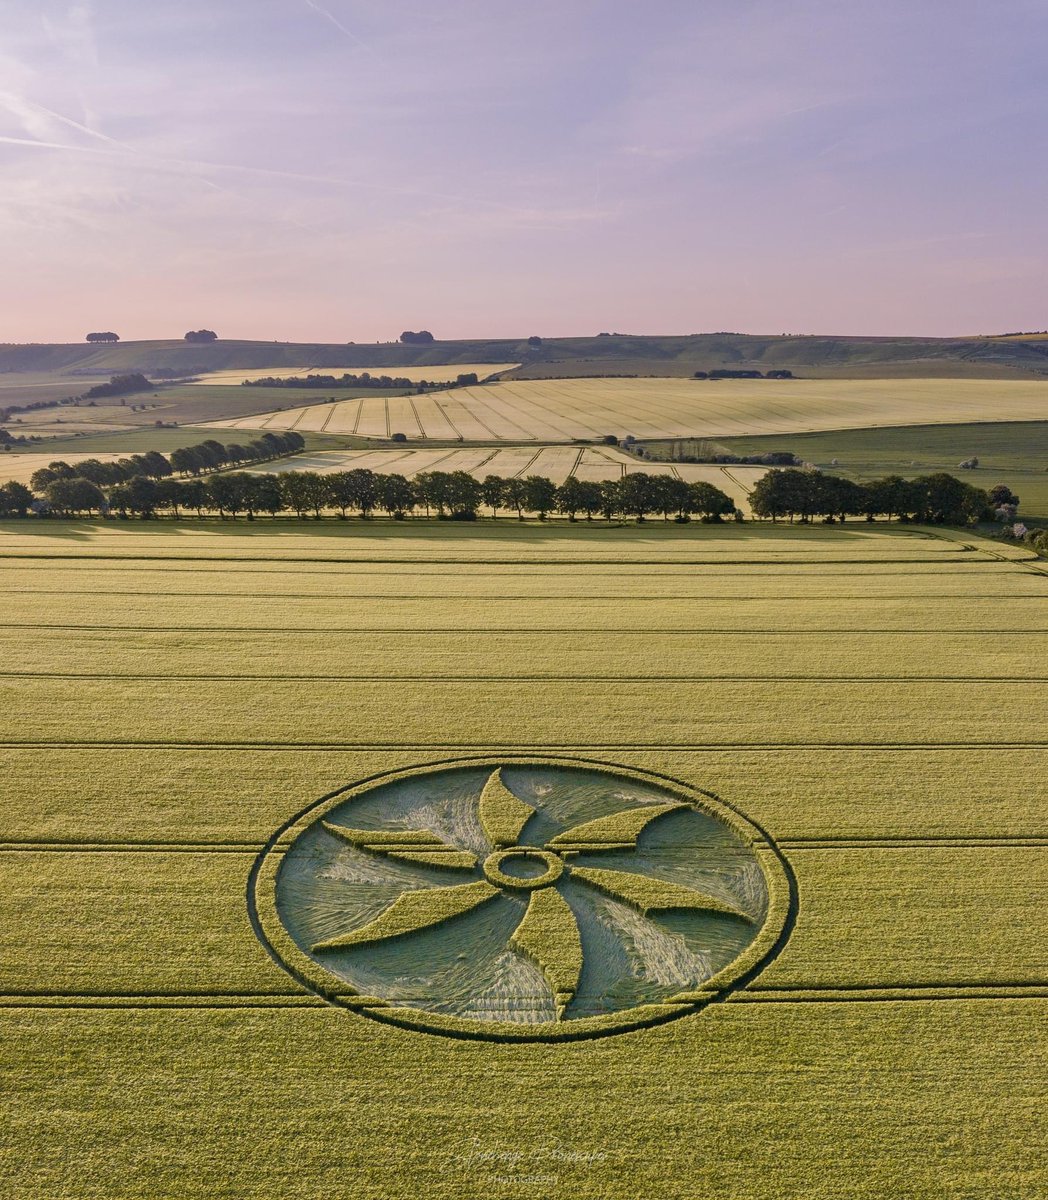 First crop circle of 2023 reported 28/5/23 in Broad Hinton, Wiltshire.
youtu.be/RLVc-PNsosI